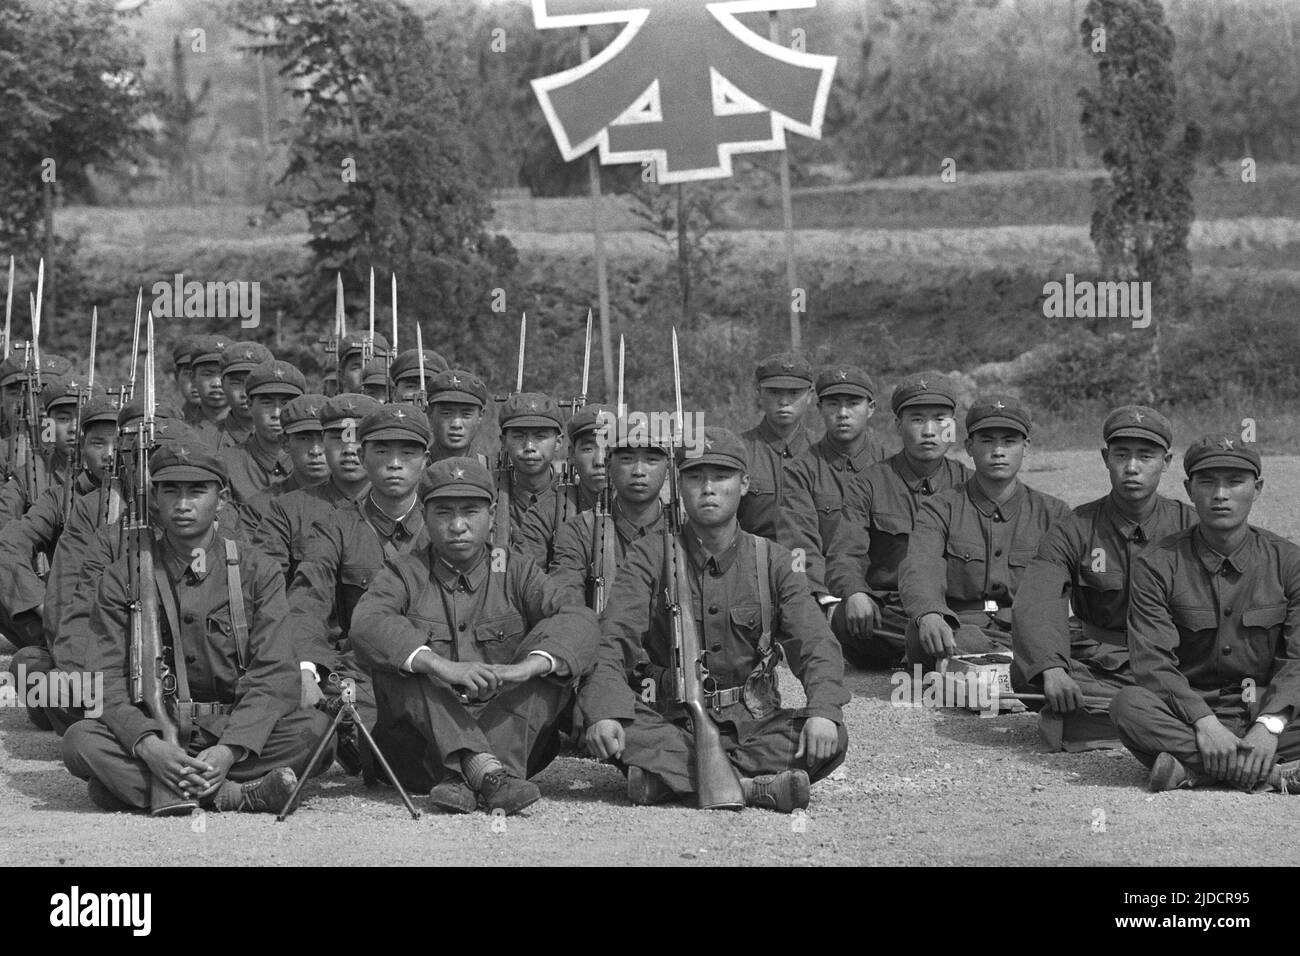 Chinese soldiers of the People's Liberation Army (PLA) sit on a training ground, with rifles and bayonets, July 26, 1972 Stock Photo